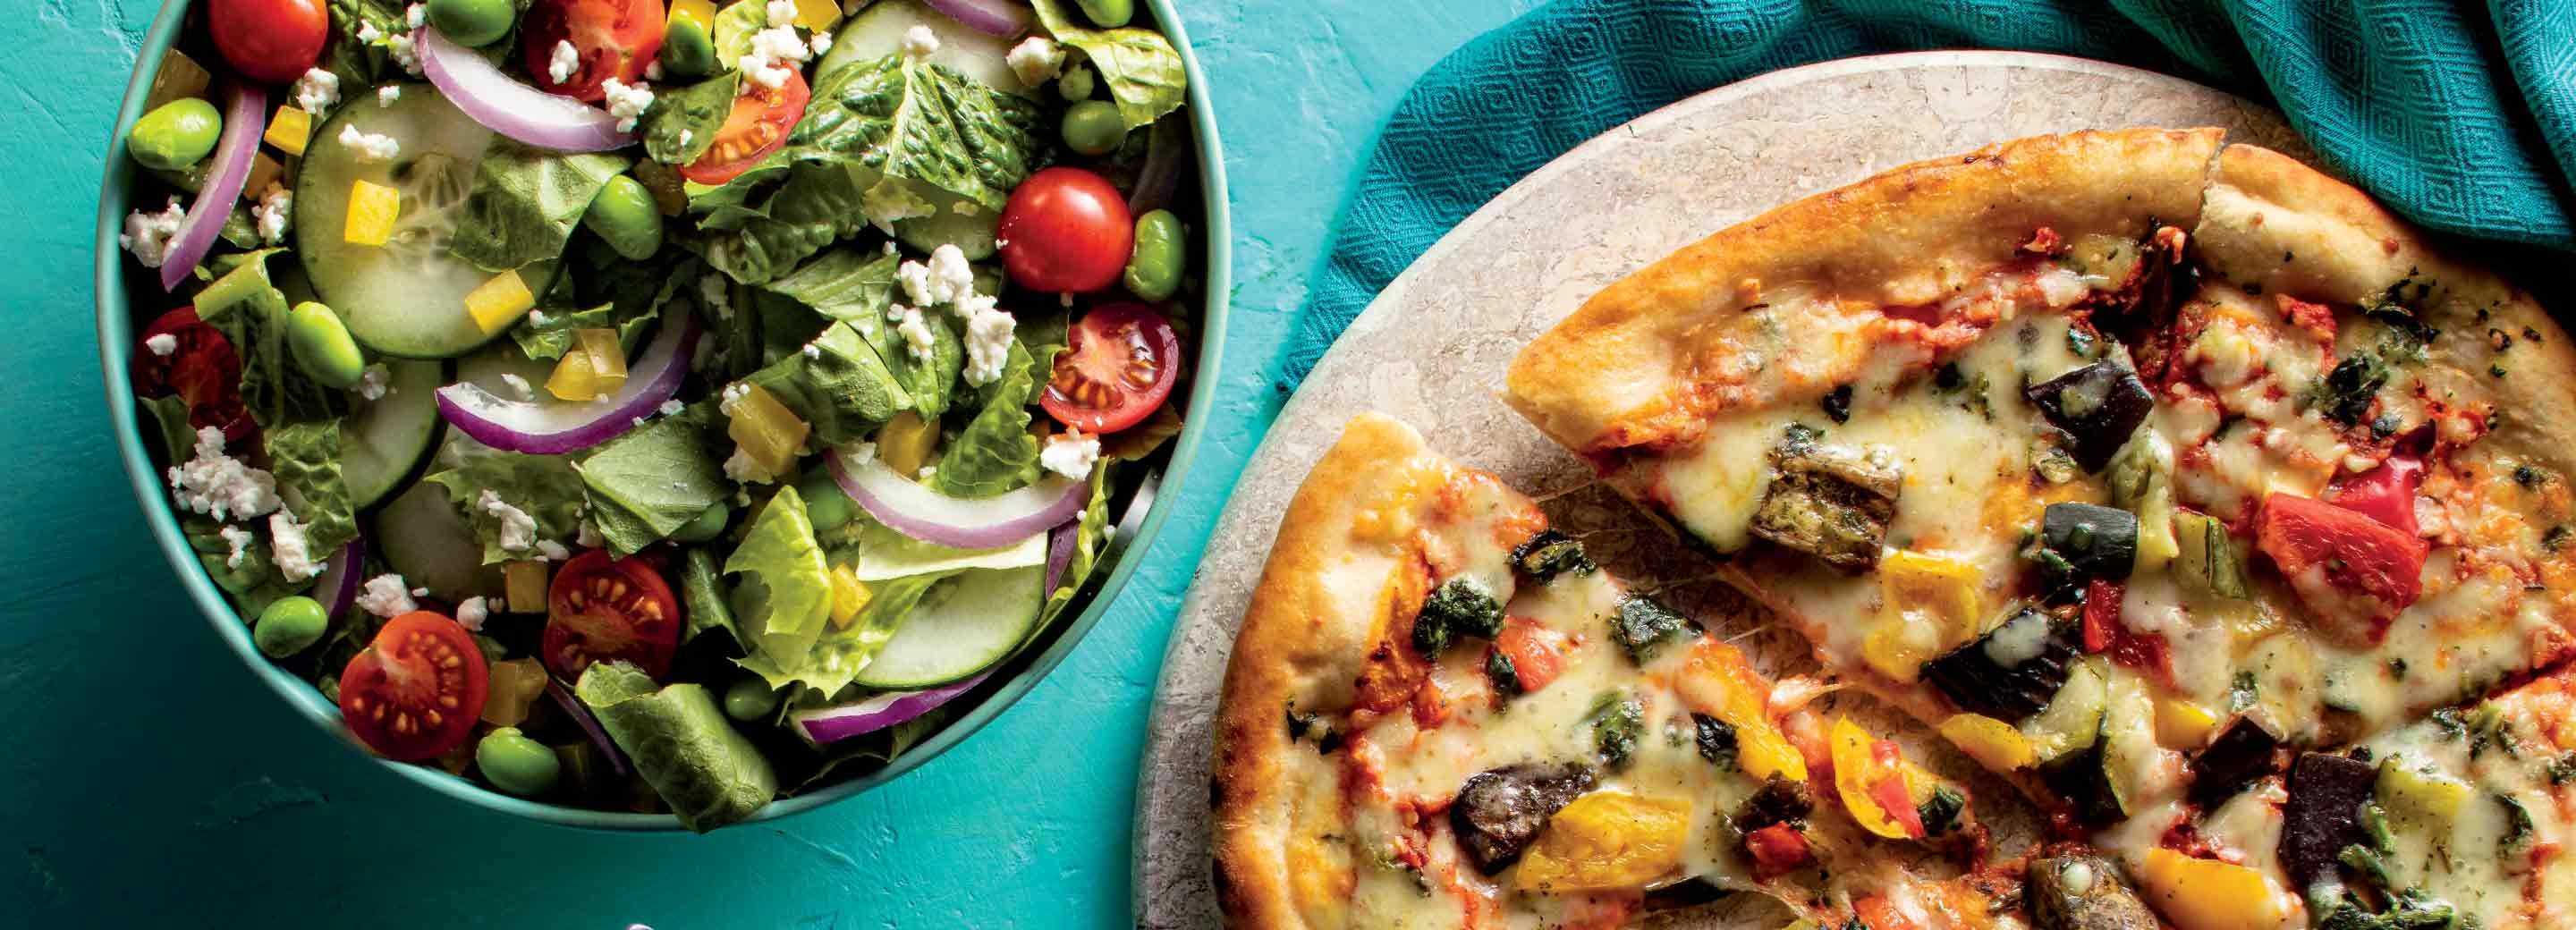 Full Circle Organic Grilled Vegetable Pizza with Salad